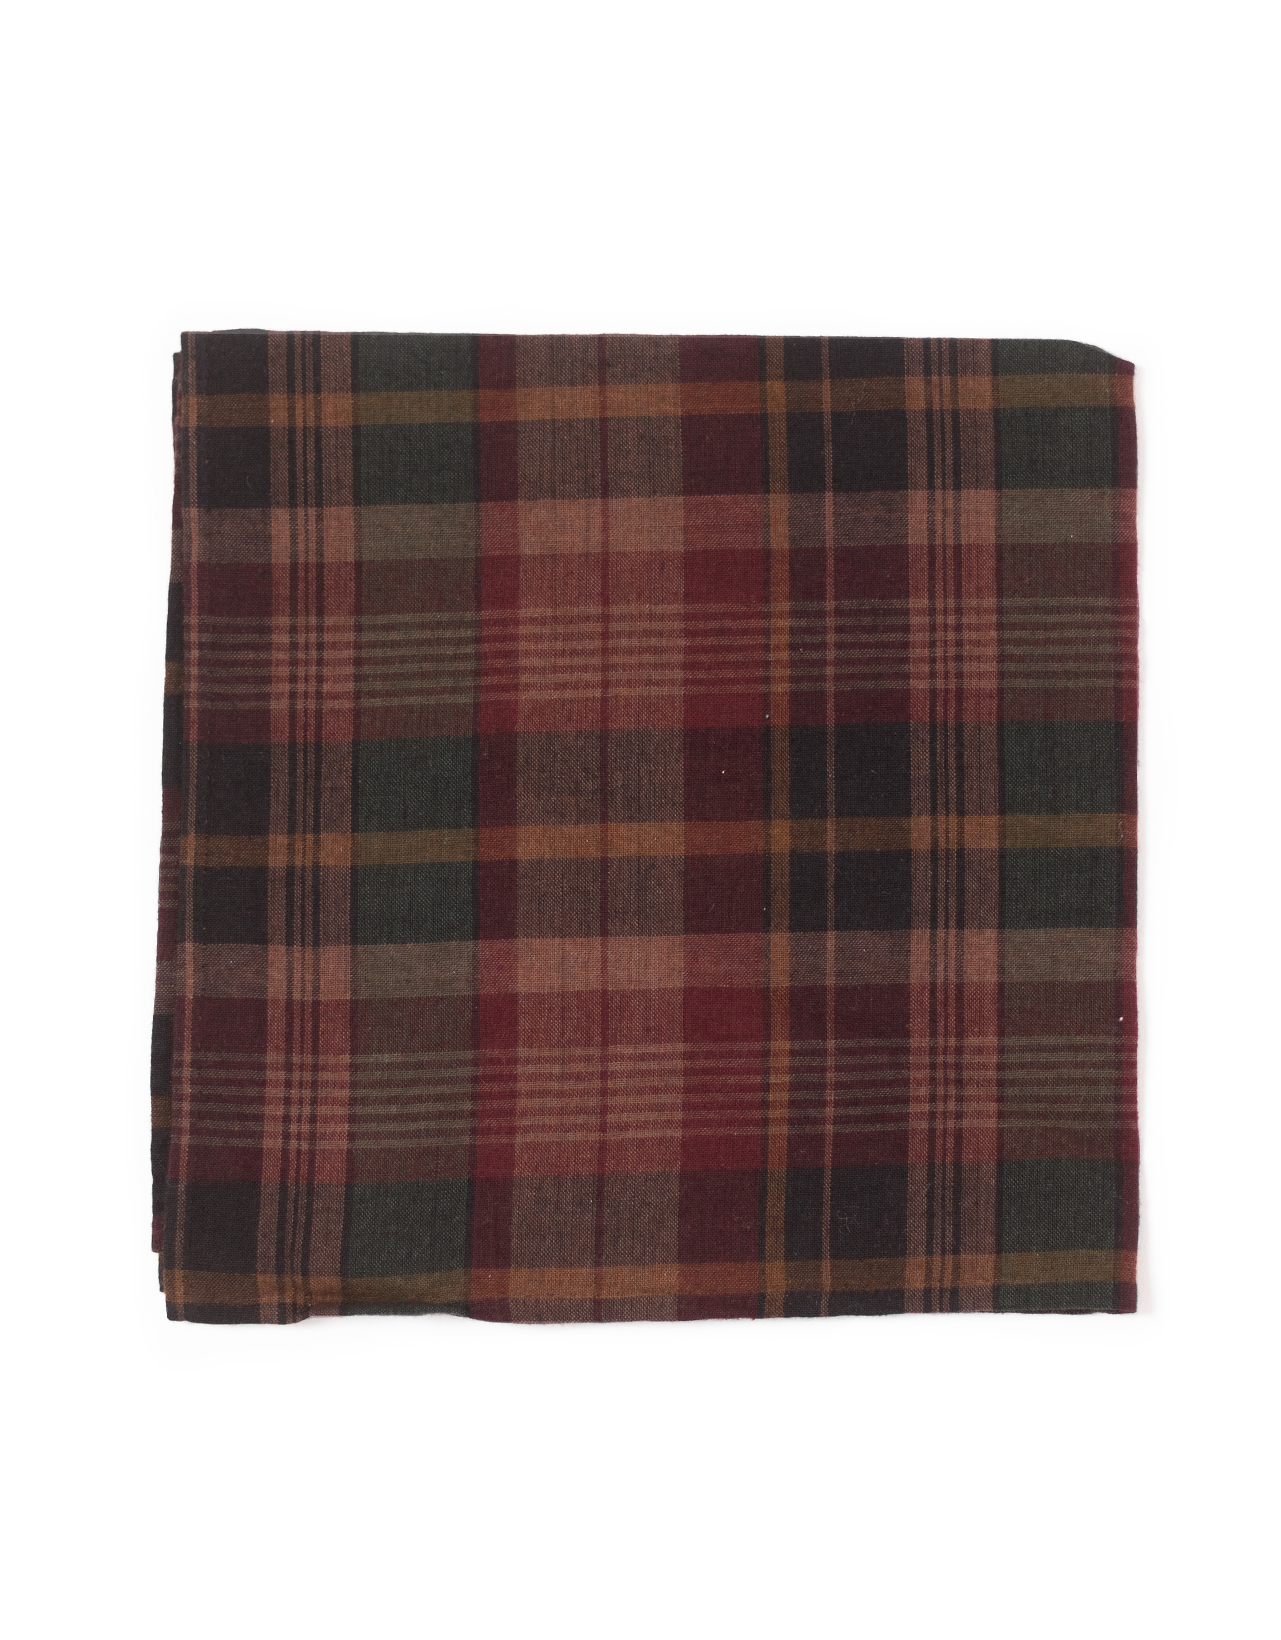 MADRAS POCKET SQUARE - RED/BROWN/GREEN